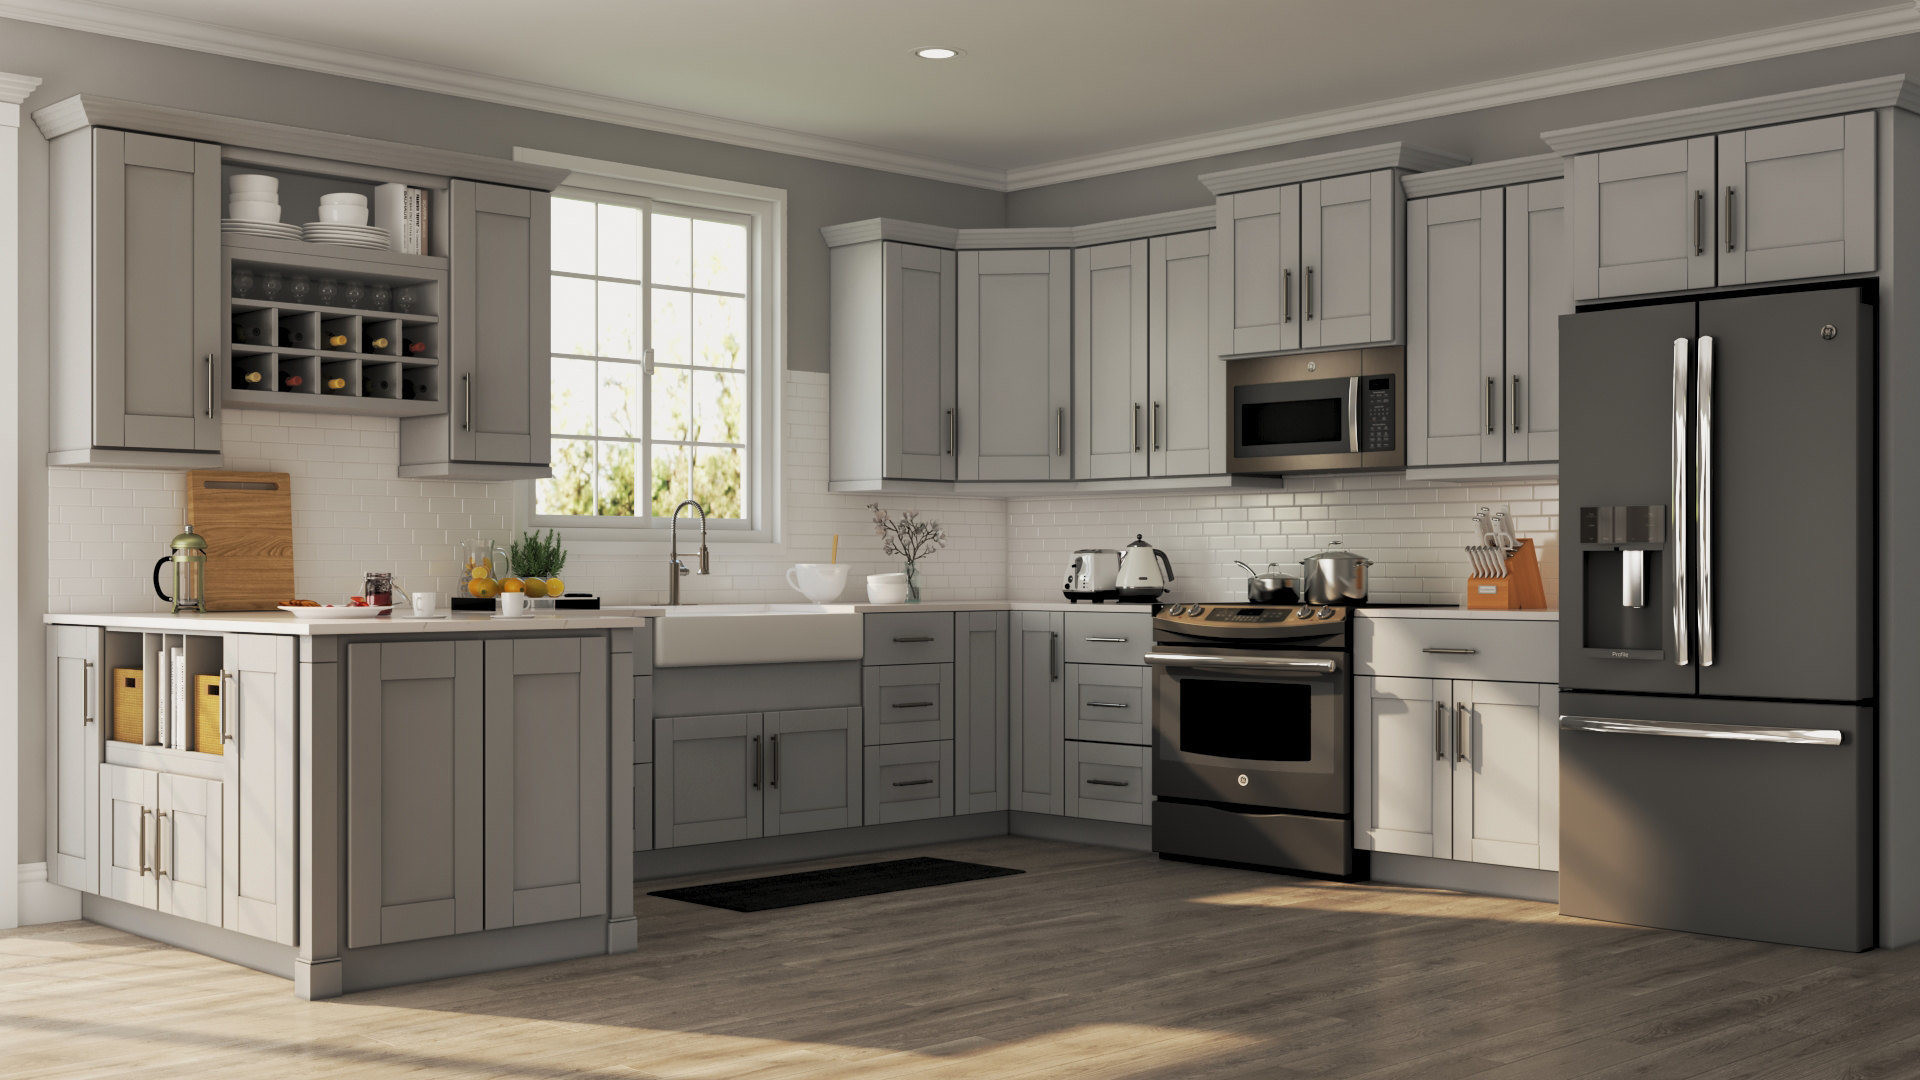 Kitchen Cabinet Walls
 Shaker Specialty Cabinets in Dove Gray – Kitchen – The